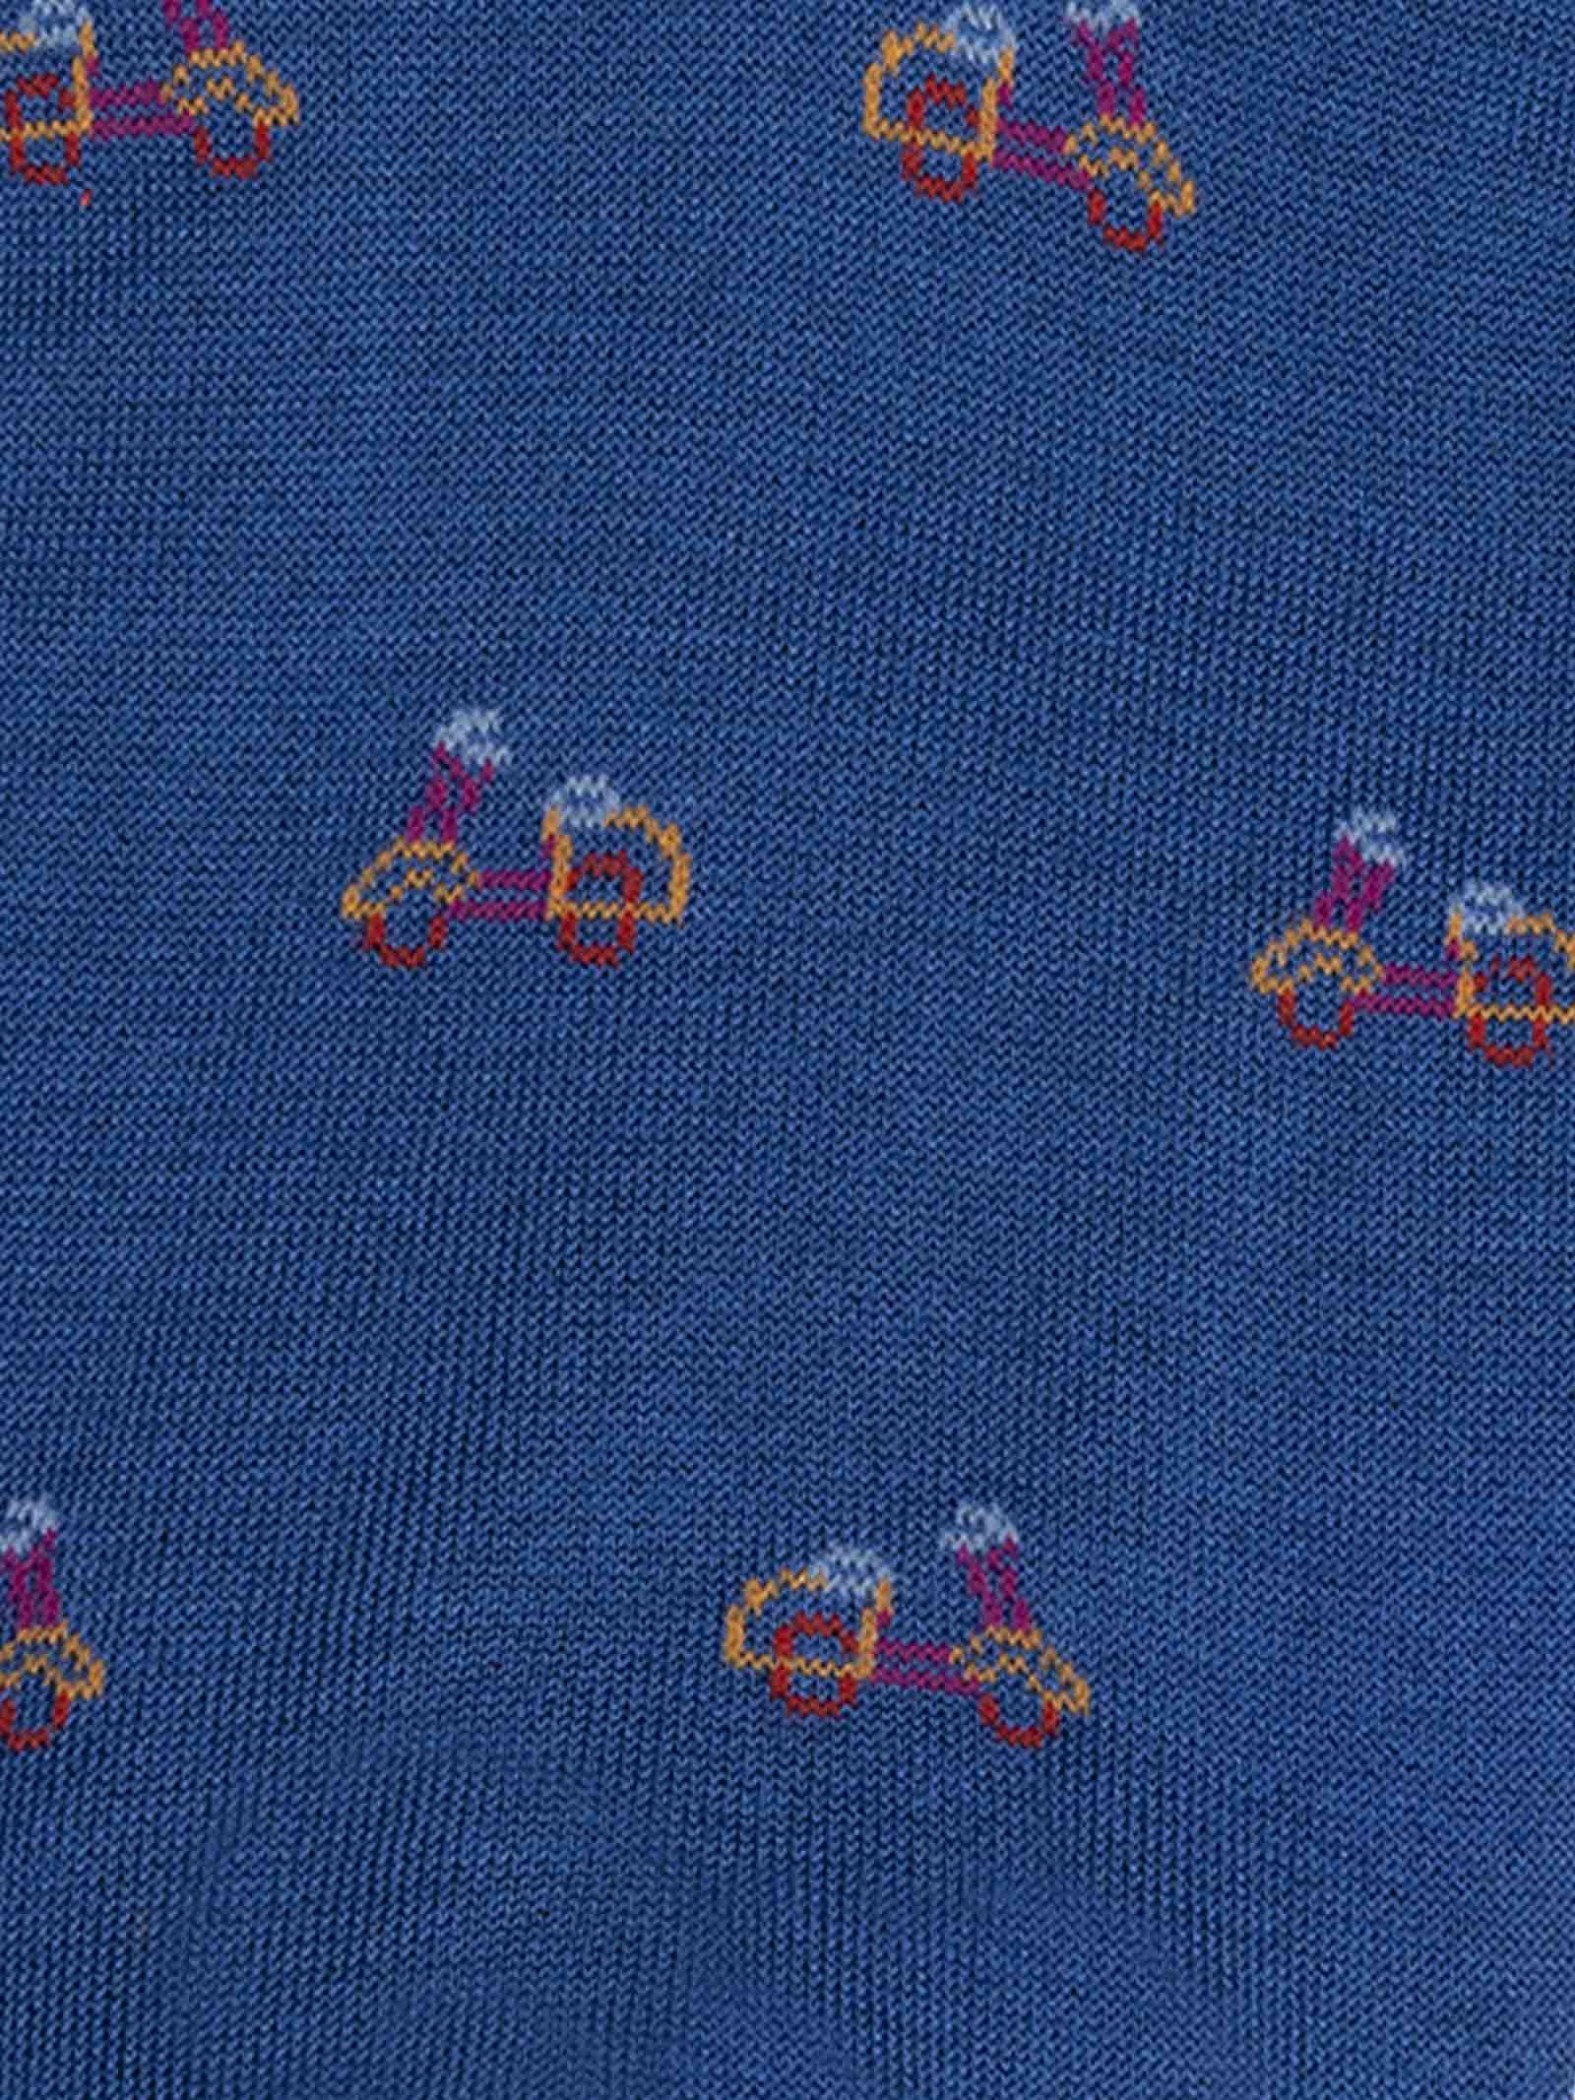 Men's Vespa patterned crew socks in cool cotton - Made in Italy